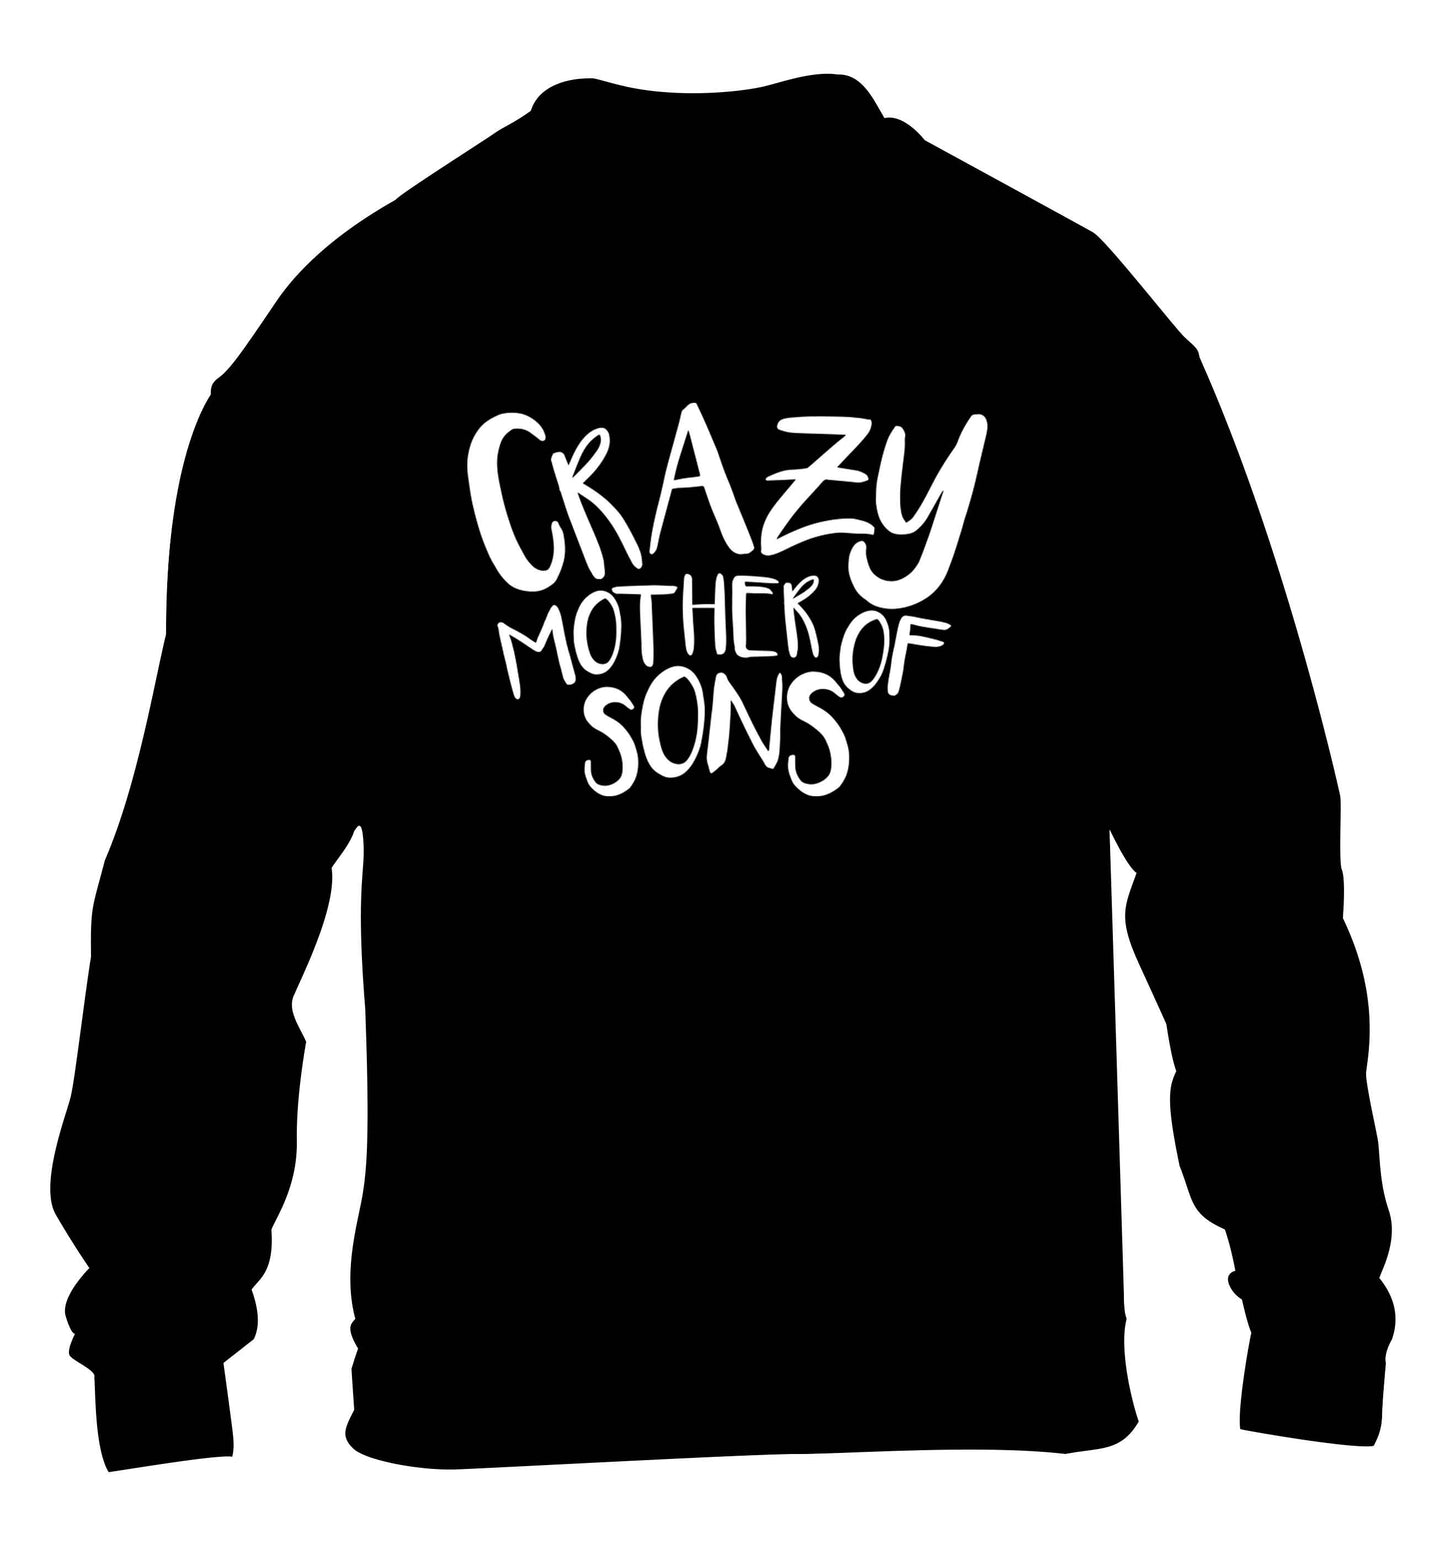 Crazy mother of sons children's black sweater 12-13 Years